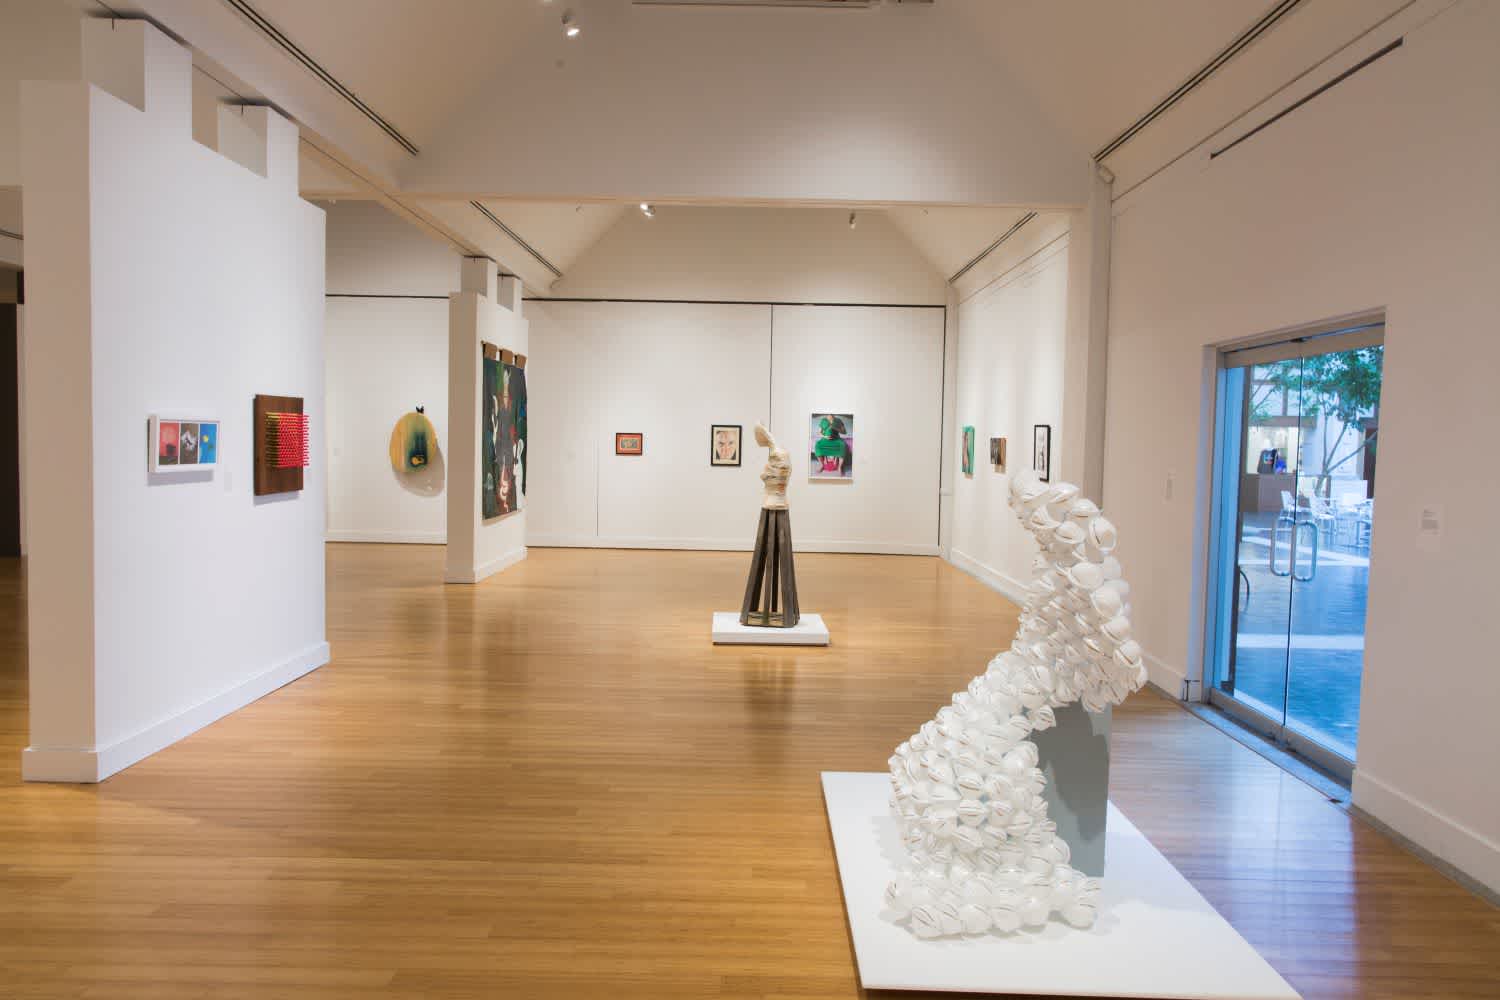 Installation image of the 2019 contemporary art exhibition New Waves 2019 at the Virginia Museum of Contemporary Art.